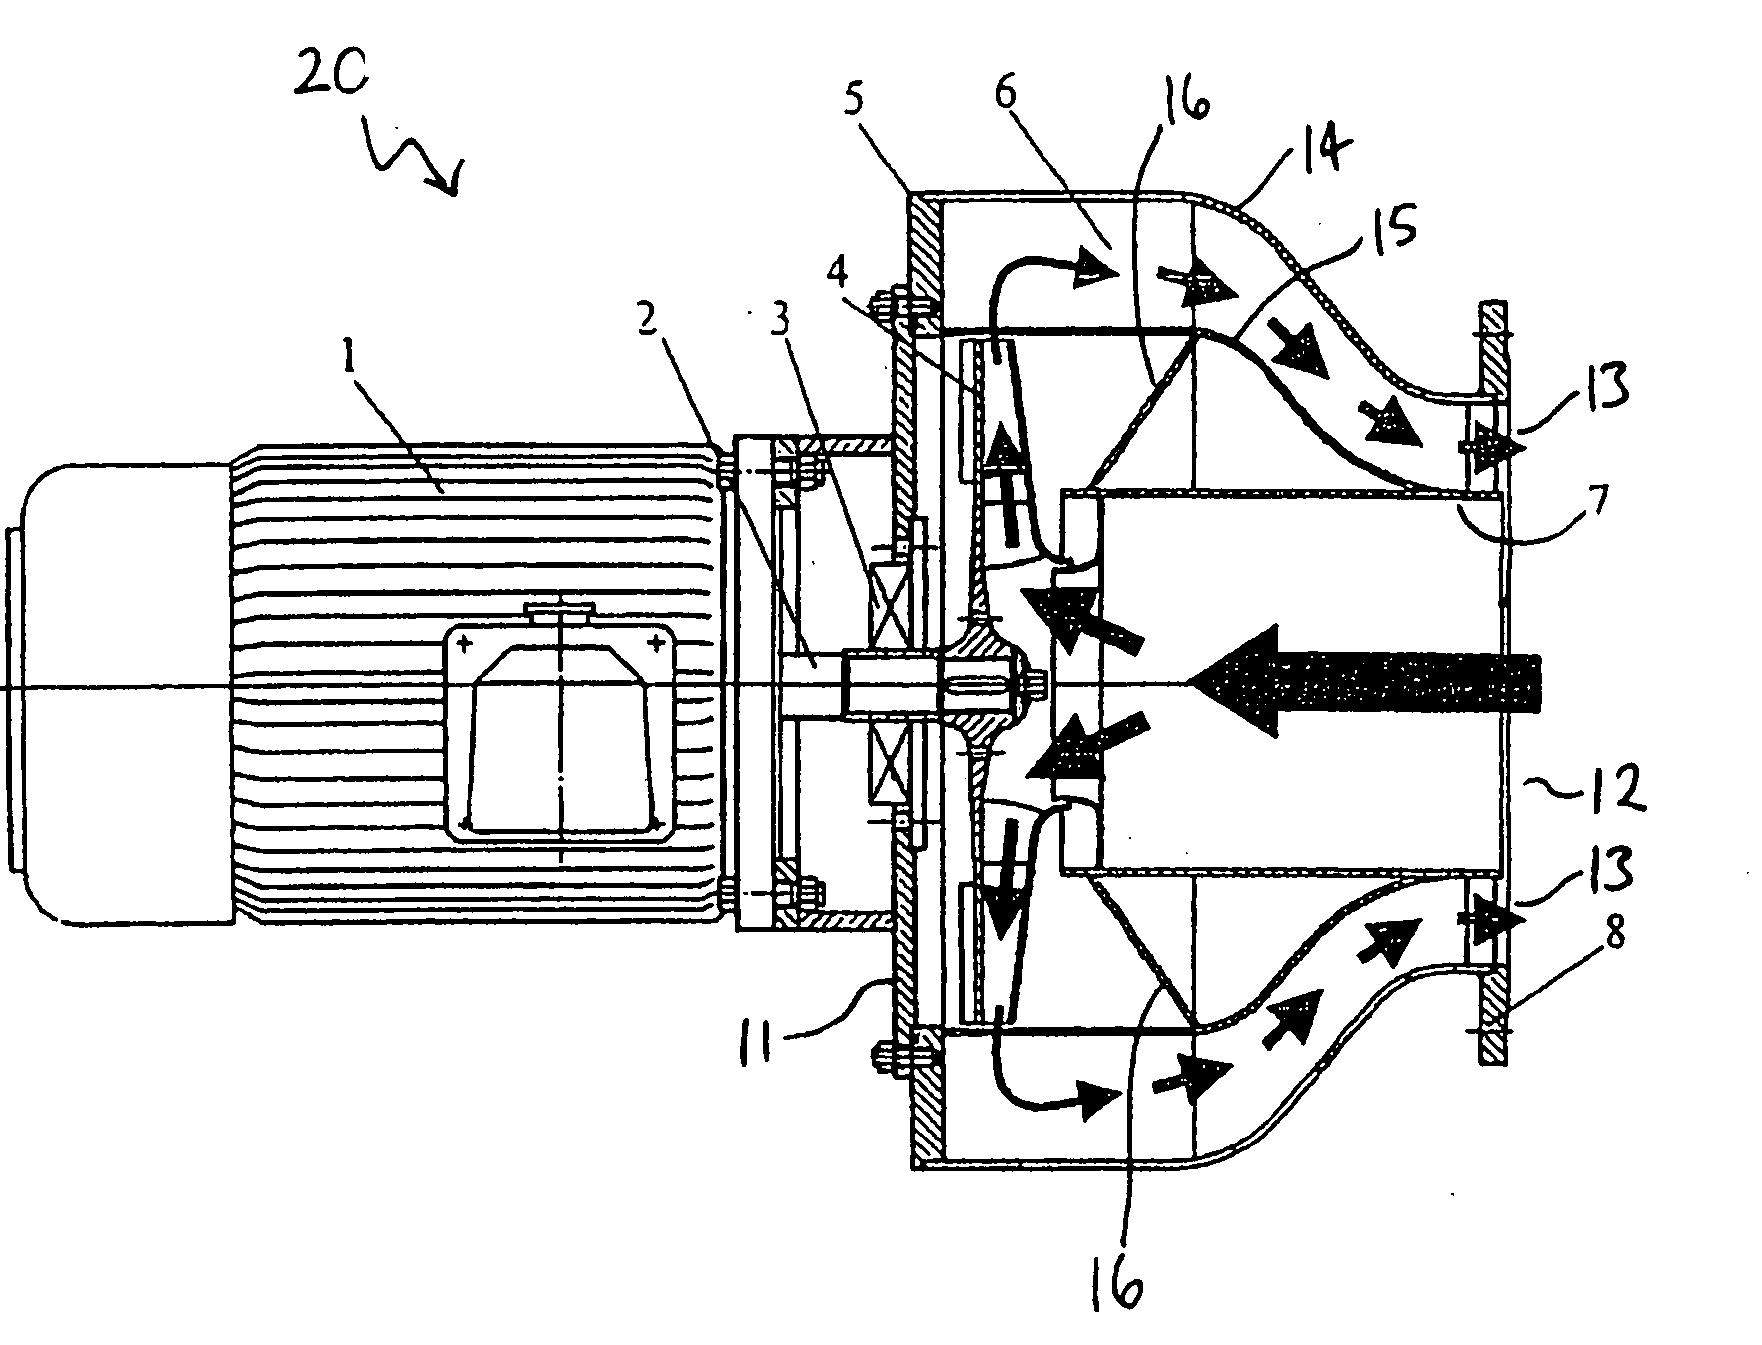 Blower for a textiles processing machine